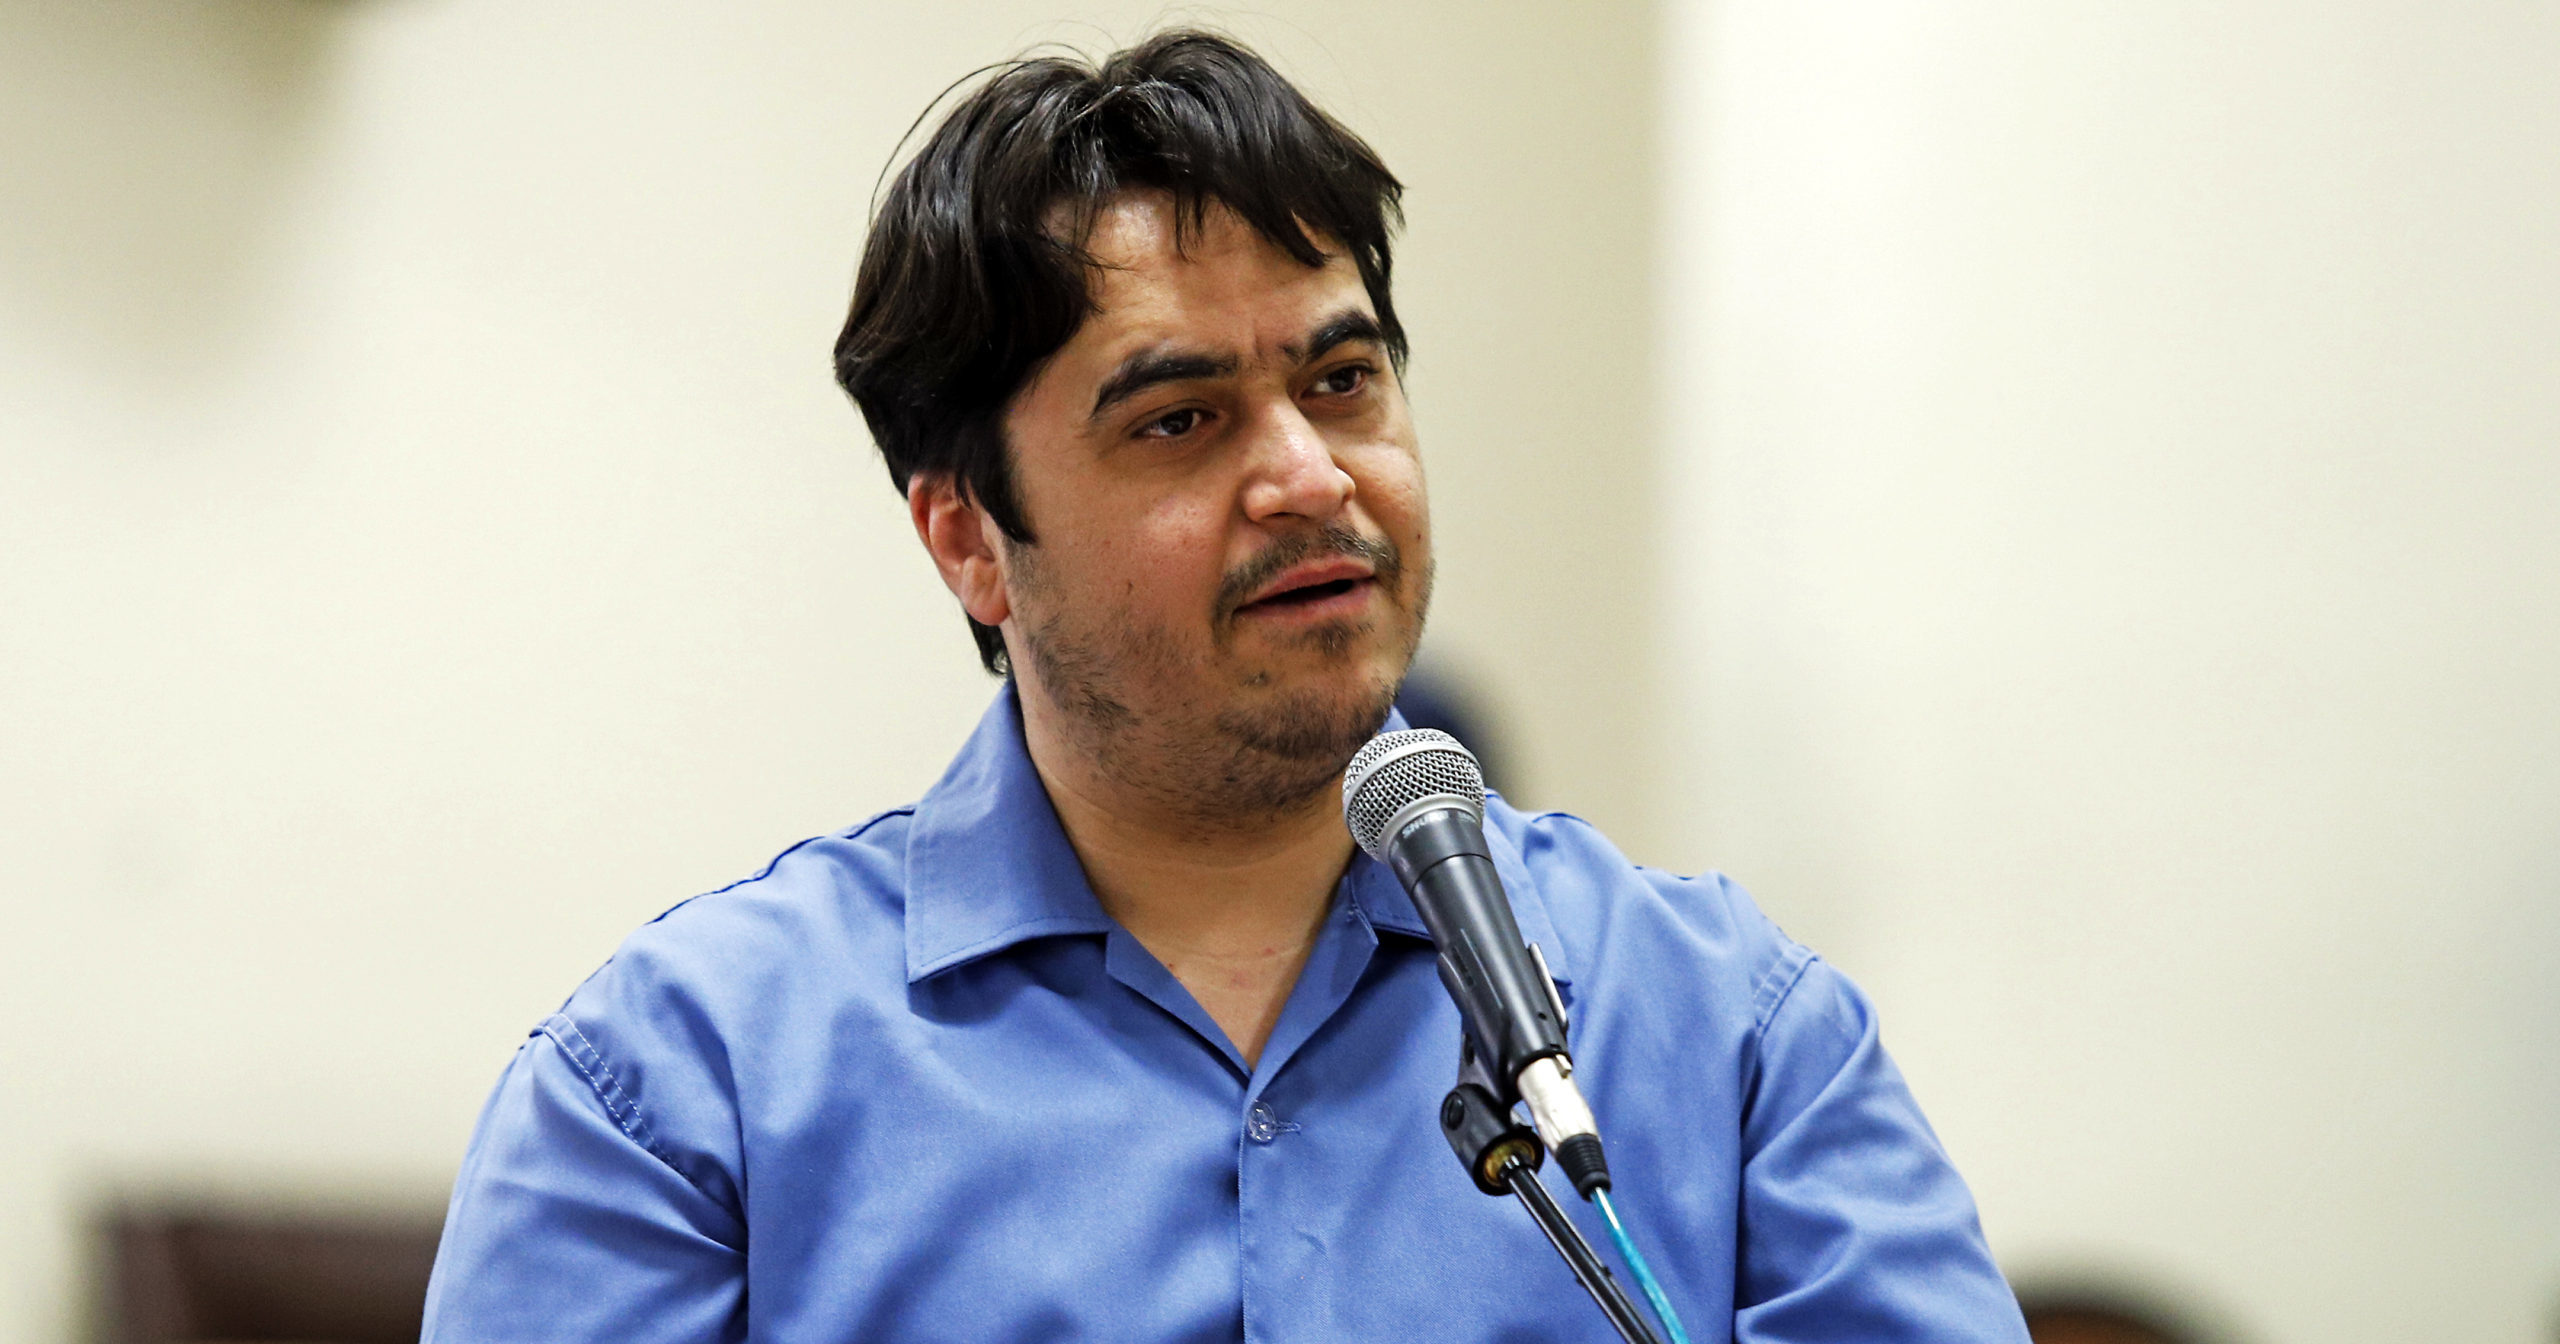 Journalist Ruhollah Zam speaks during his trial at the Revolutionary Court in Tehran, Iran, on June 2, 2020.